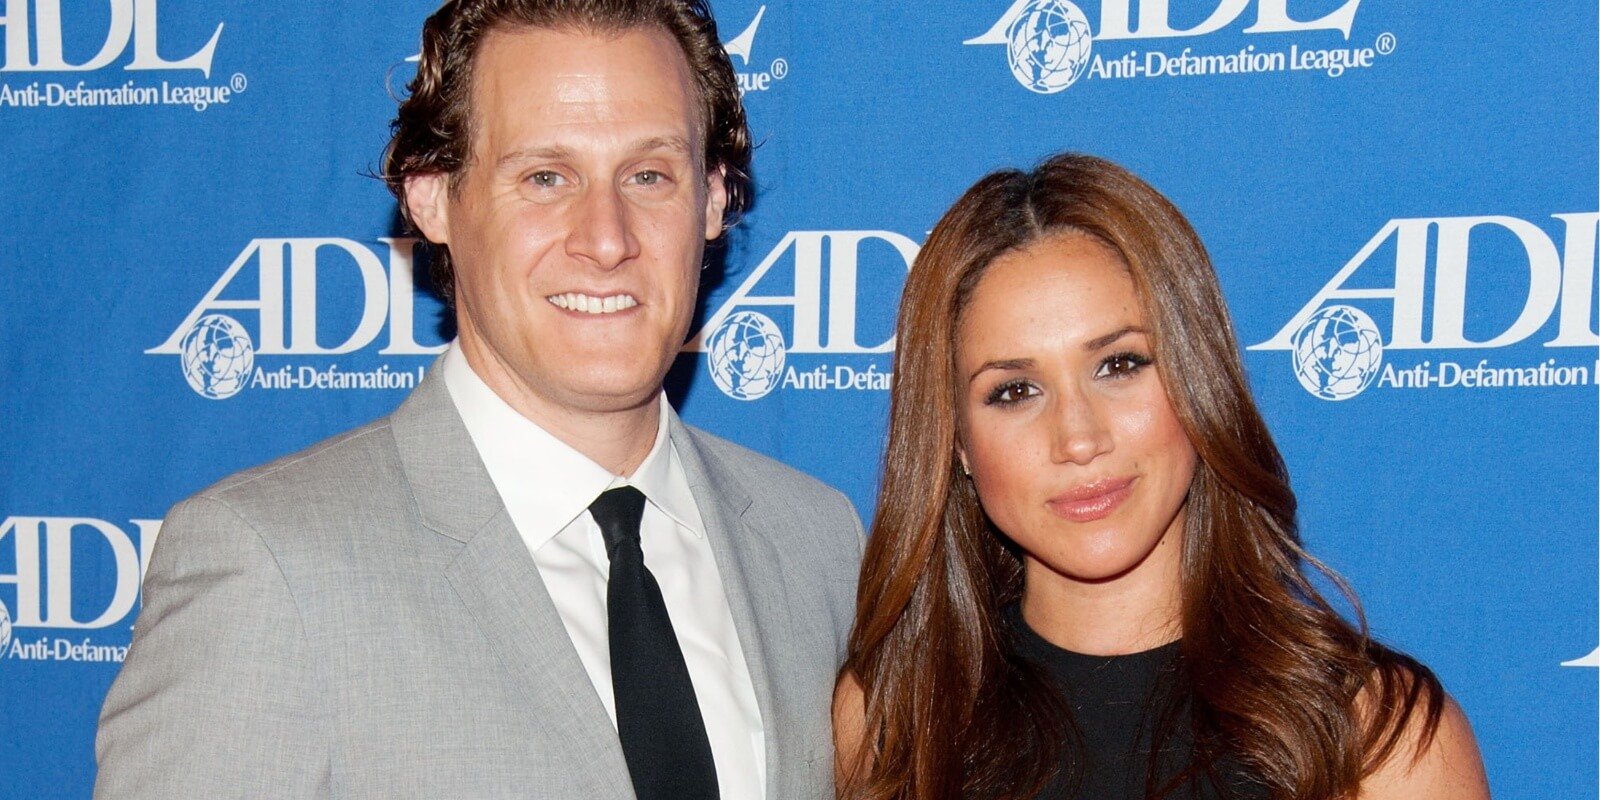 Trevor Engelson and Meghan Markle arrive at the Anti-Defamation League Entertainment Industry Awards Dinner at the Beverly Hilton on October 11, 2011 in Beverly Hills, California.